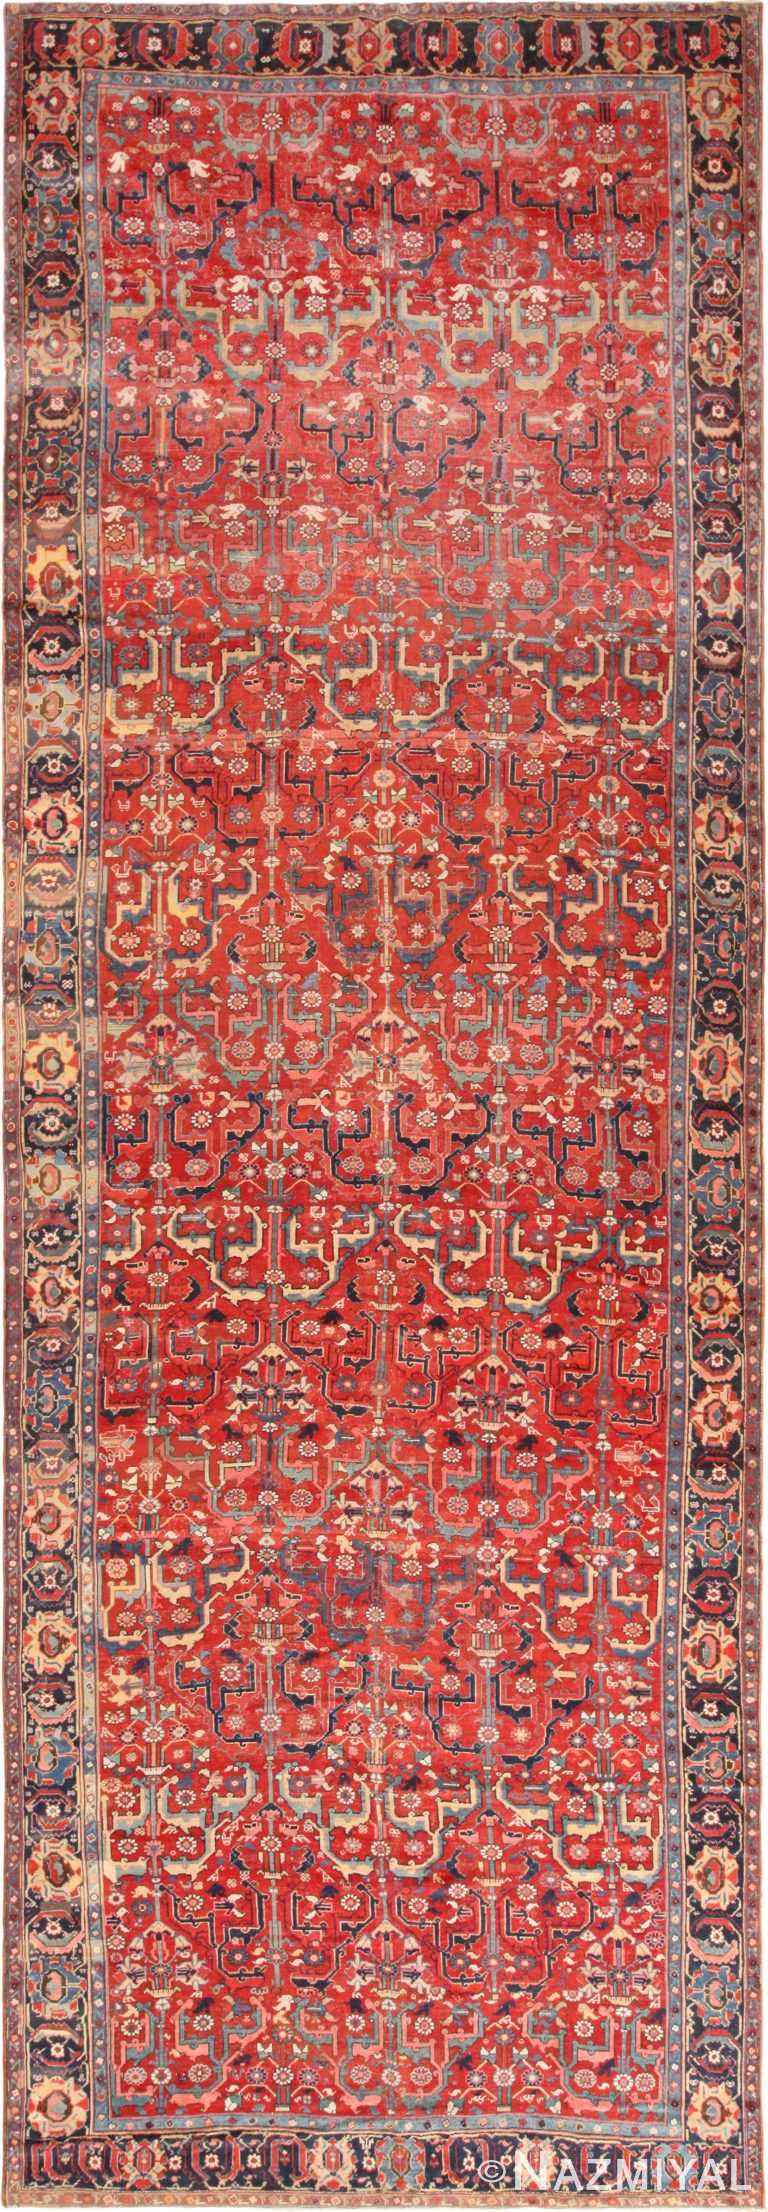 Antique North West Persian Wide Hallway Gallery Rug 71176 by Nazmiyal Antique Rugs